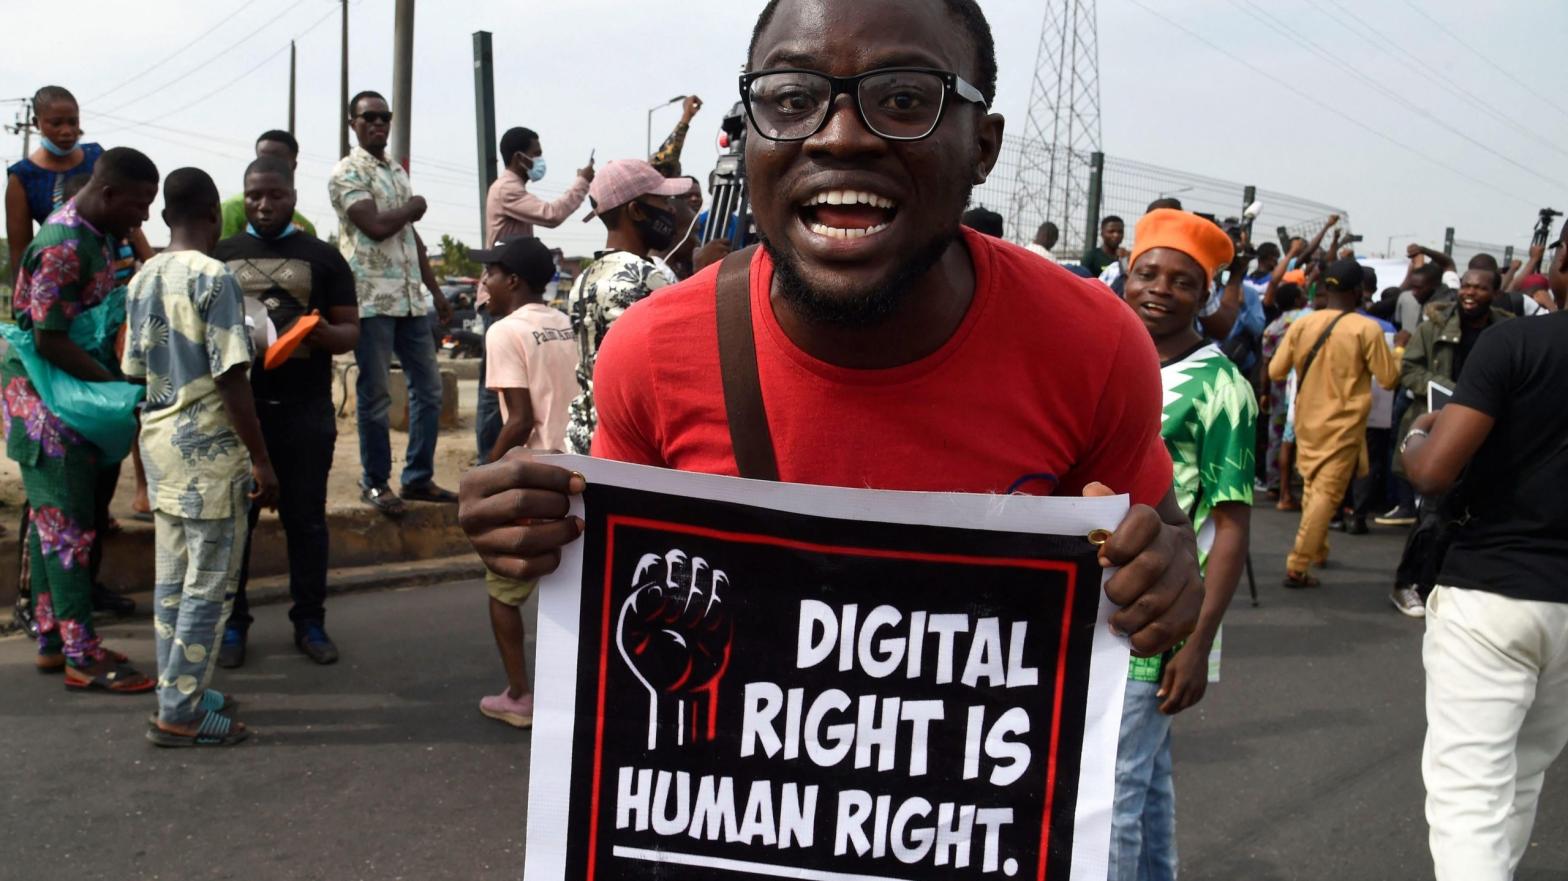 A man carries a banner calling for the end to the Twitter ban during a demonstration at Ojota in Lagos, Nigeria on June 12, 2021. (Photo: Pius Utomi Ekepei / AFP, Getty Images)